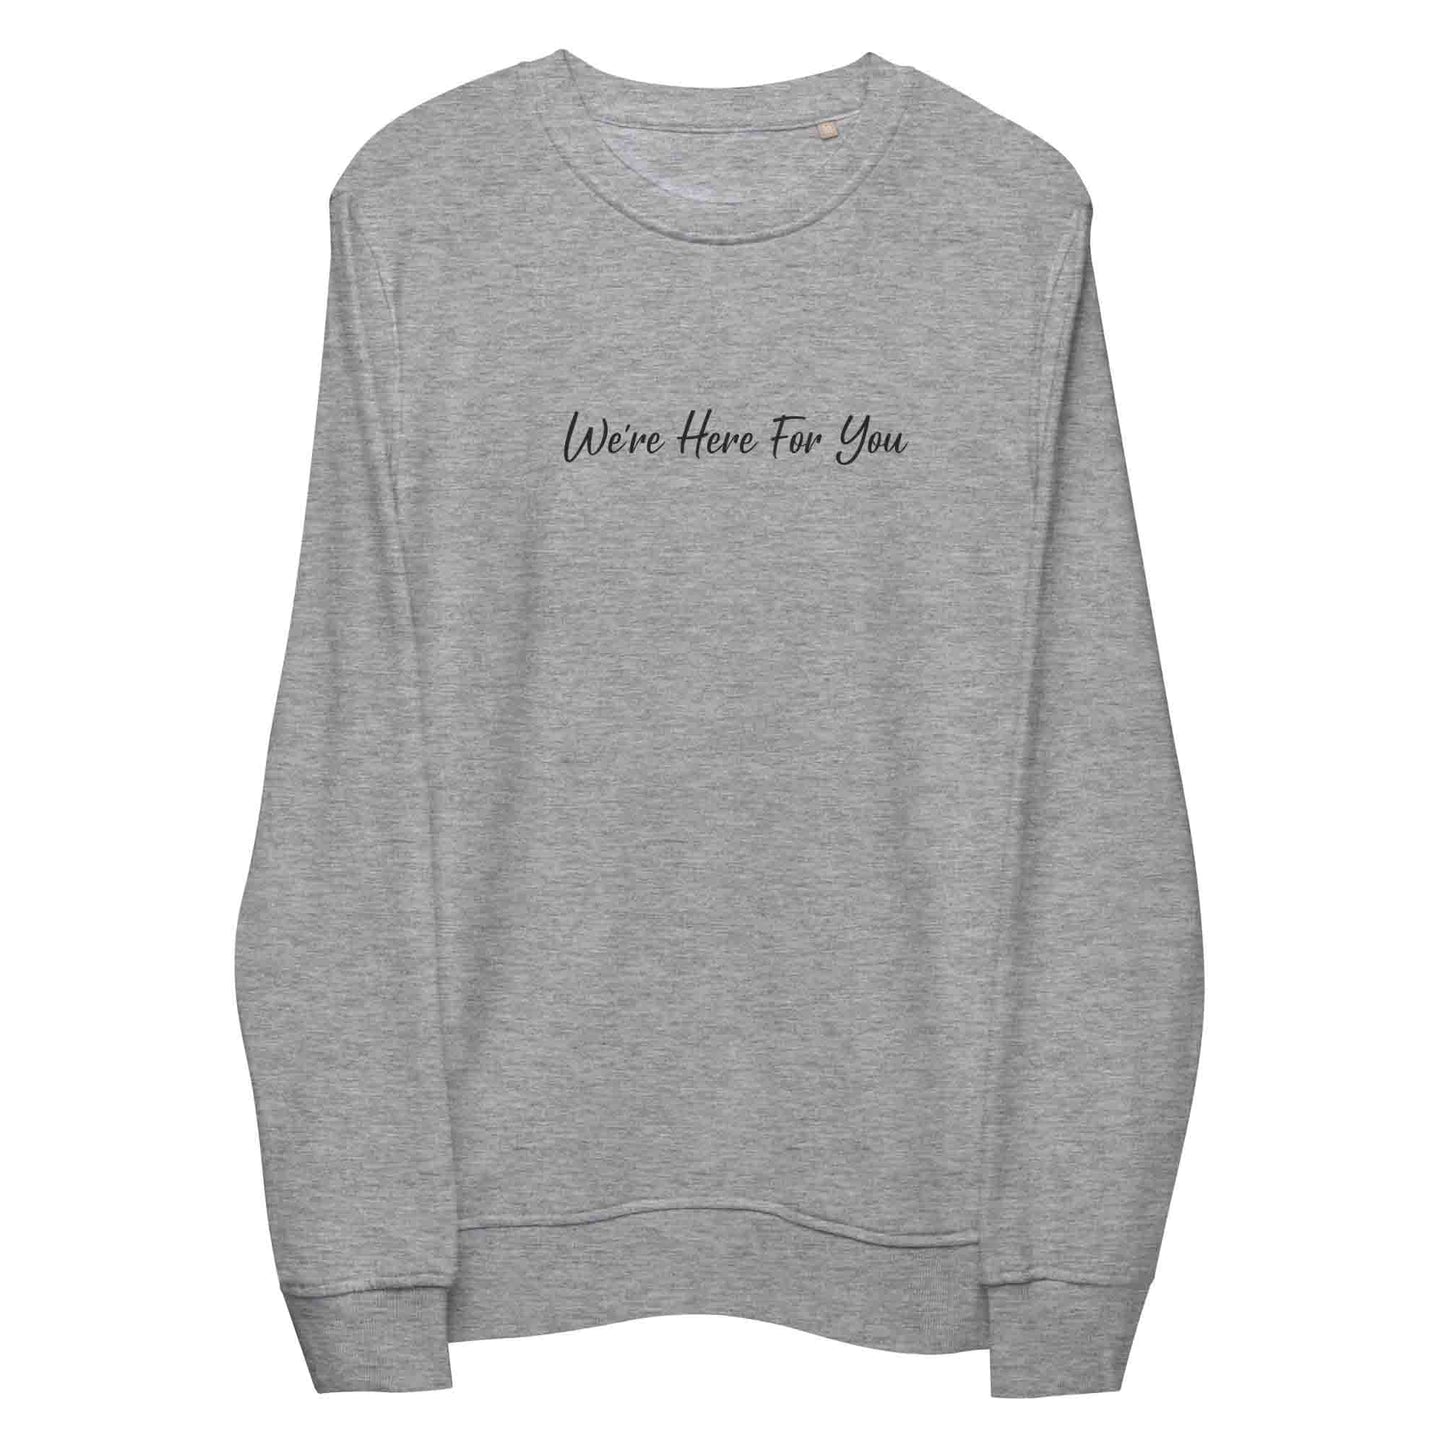 Women light gray sustainable sweatshirt with inspirational quote, "We Are Here For You."